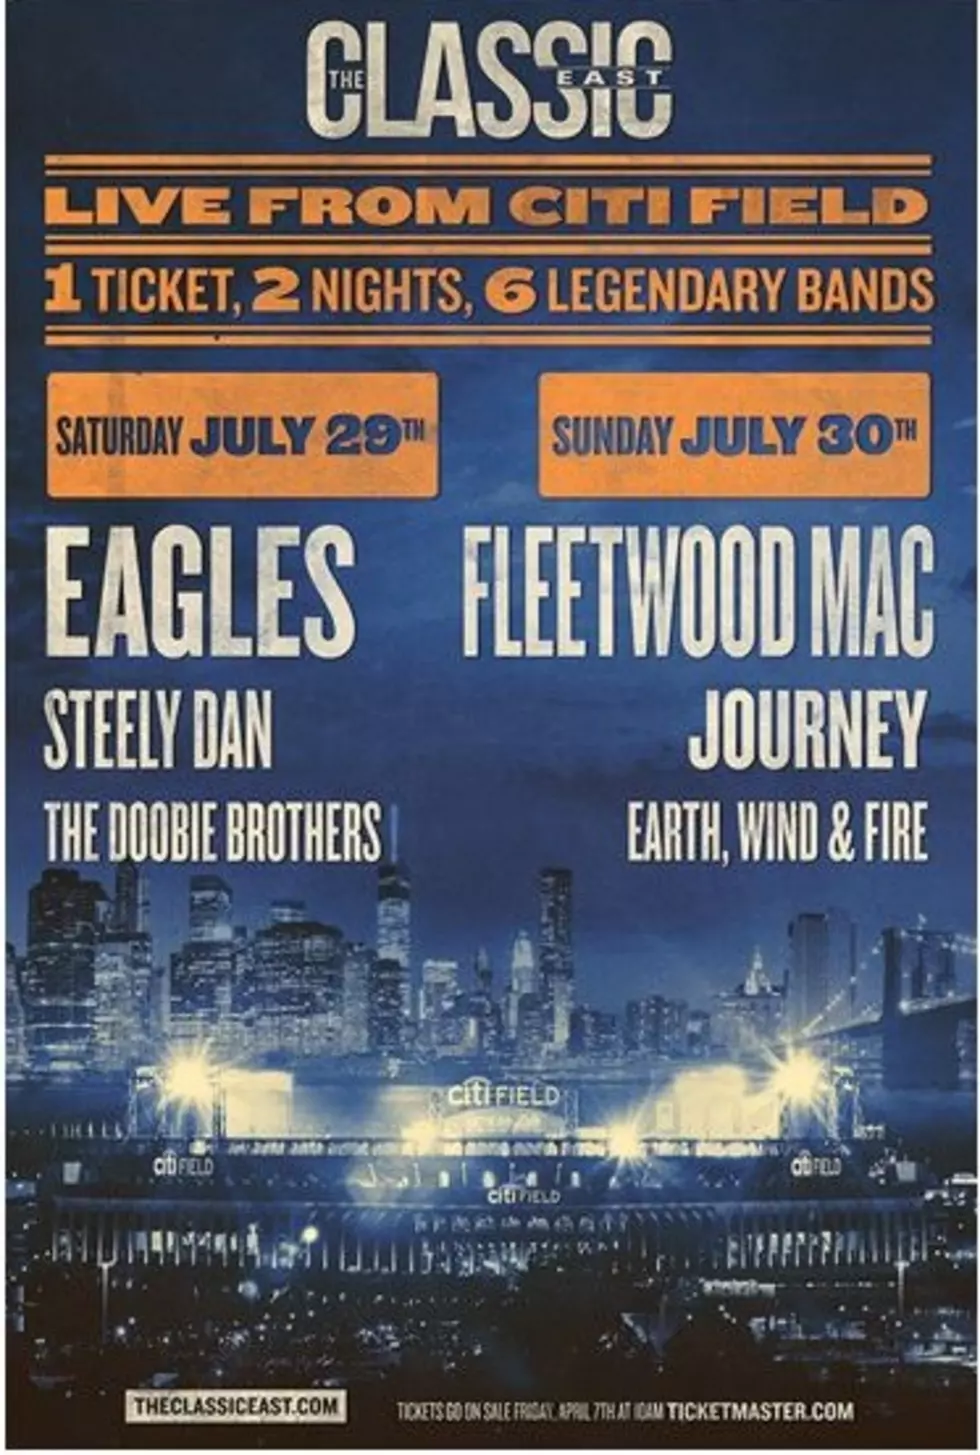 Classic East Concerts with The Eagles and Fleetwood Mac Info